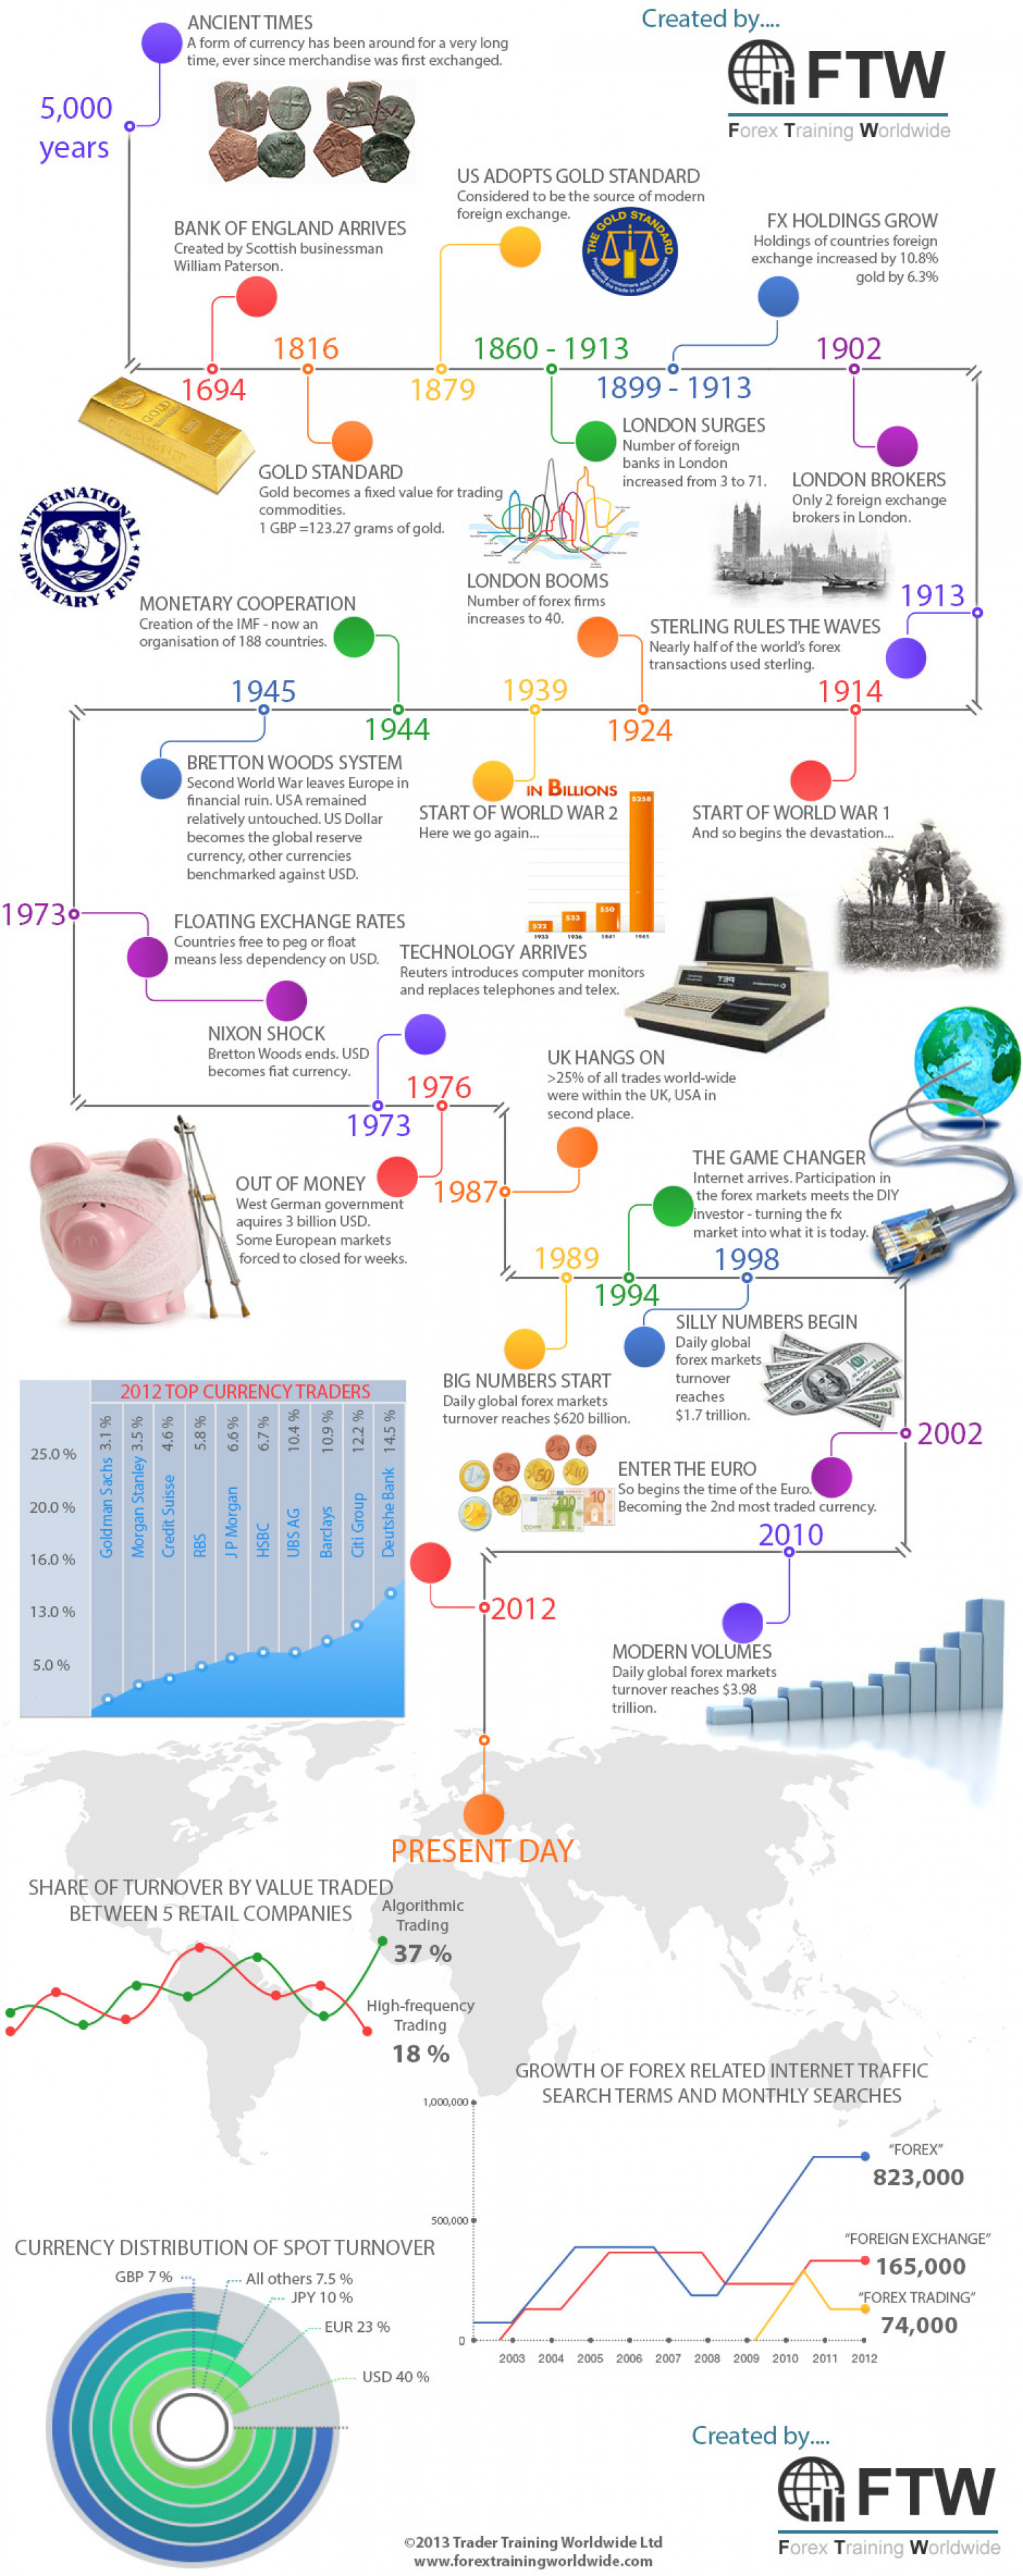 The History of Forex Infographic